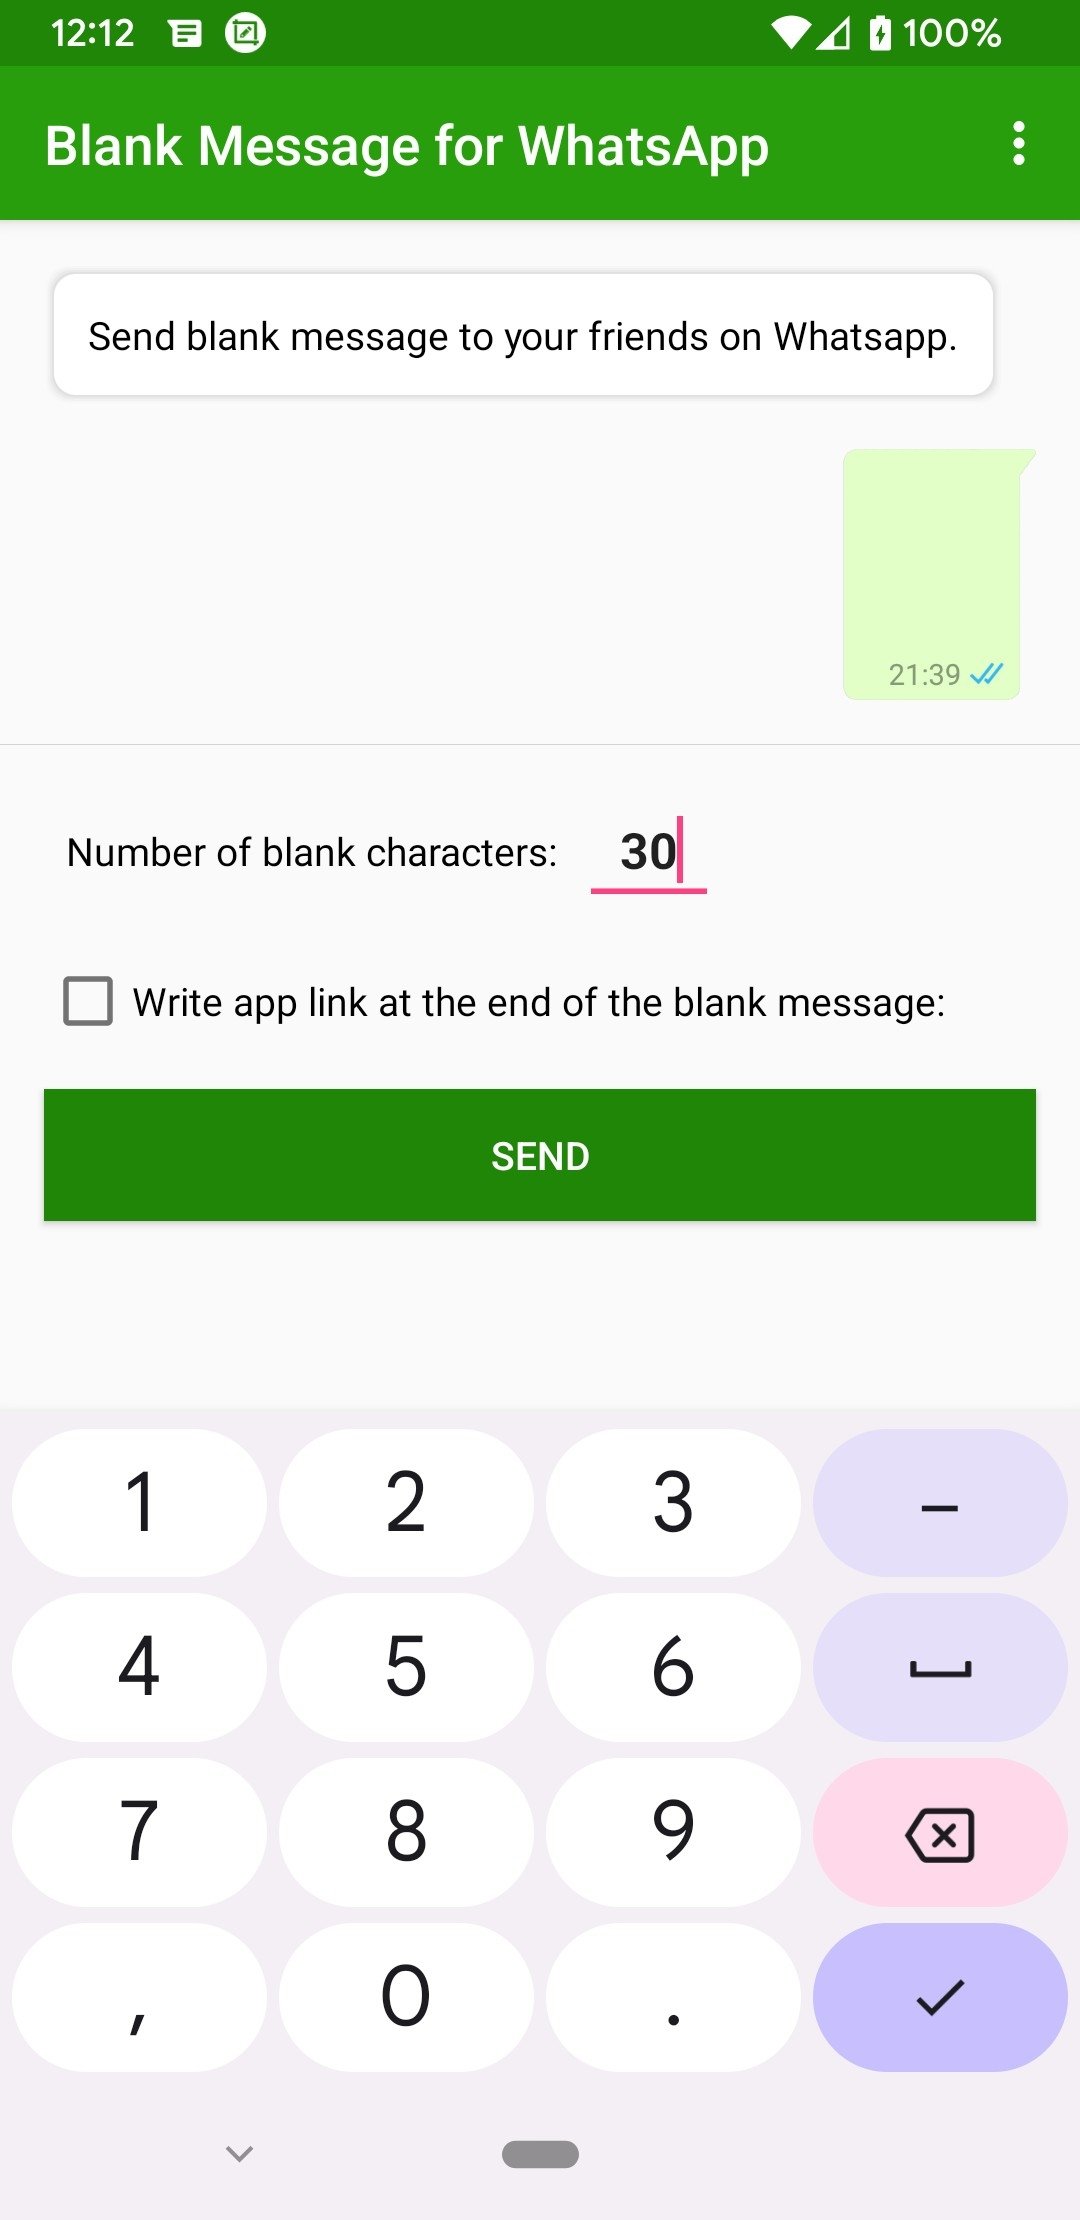 line app for pc blank